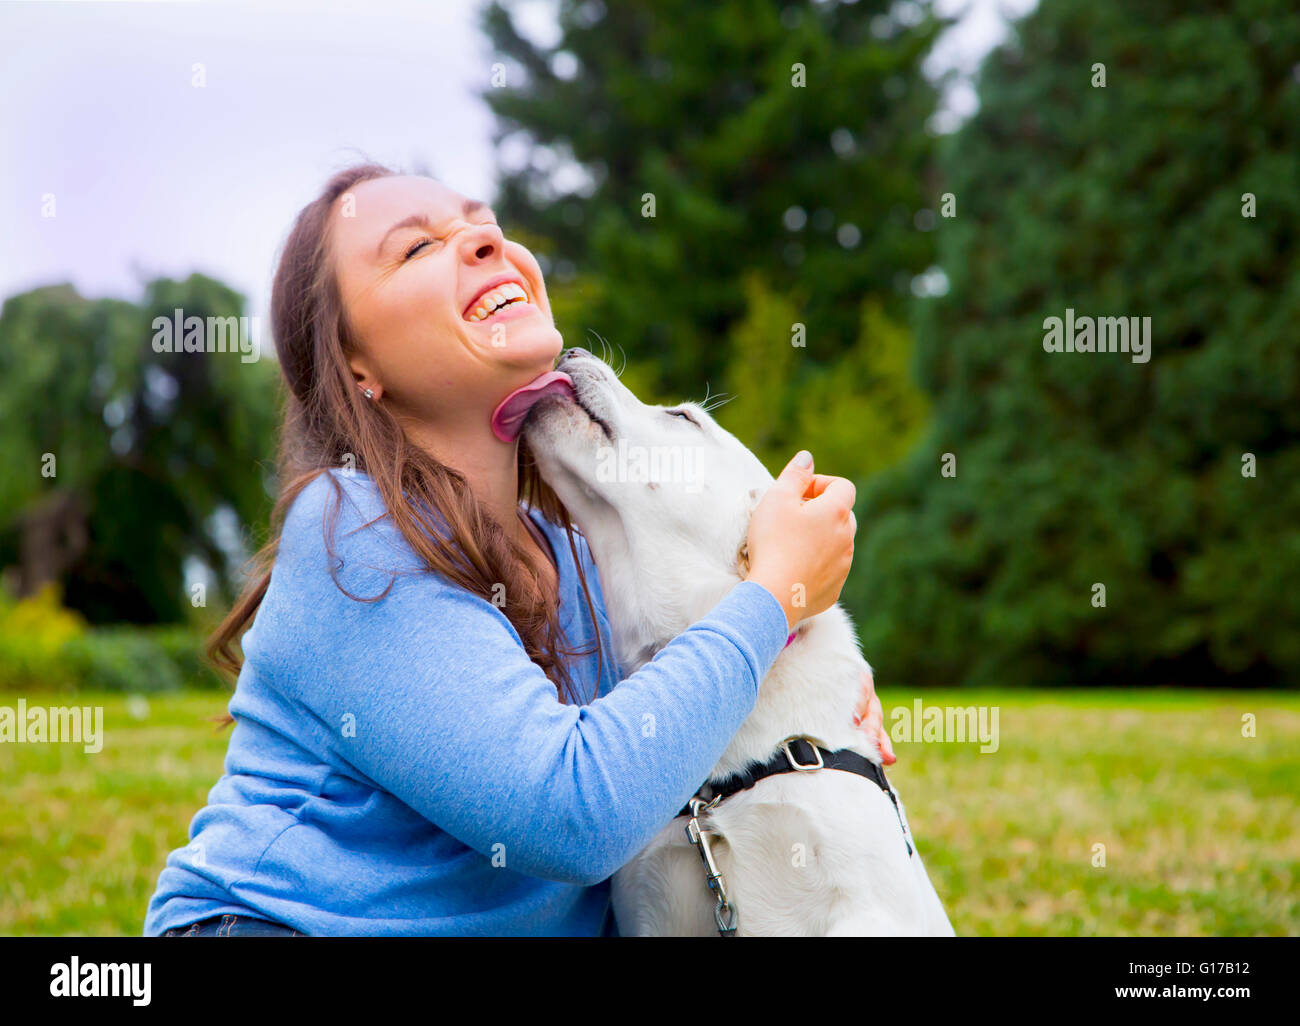 Young woman sitting with dog in park, dog licking woman's face Stock Photo